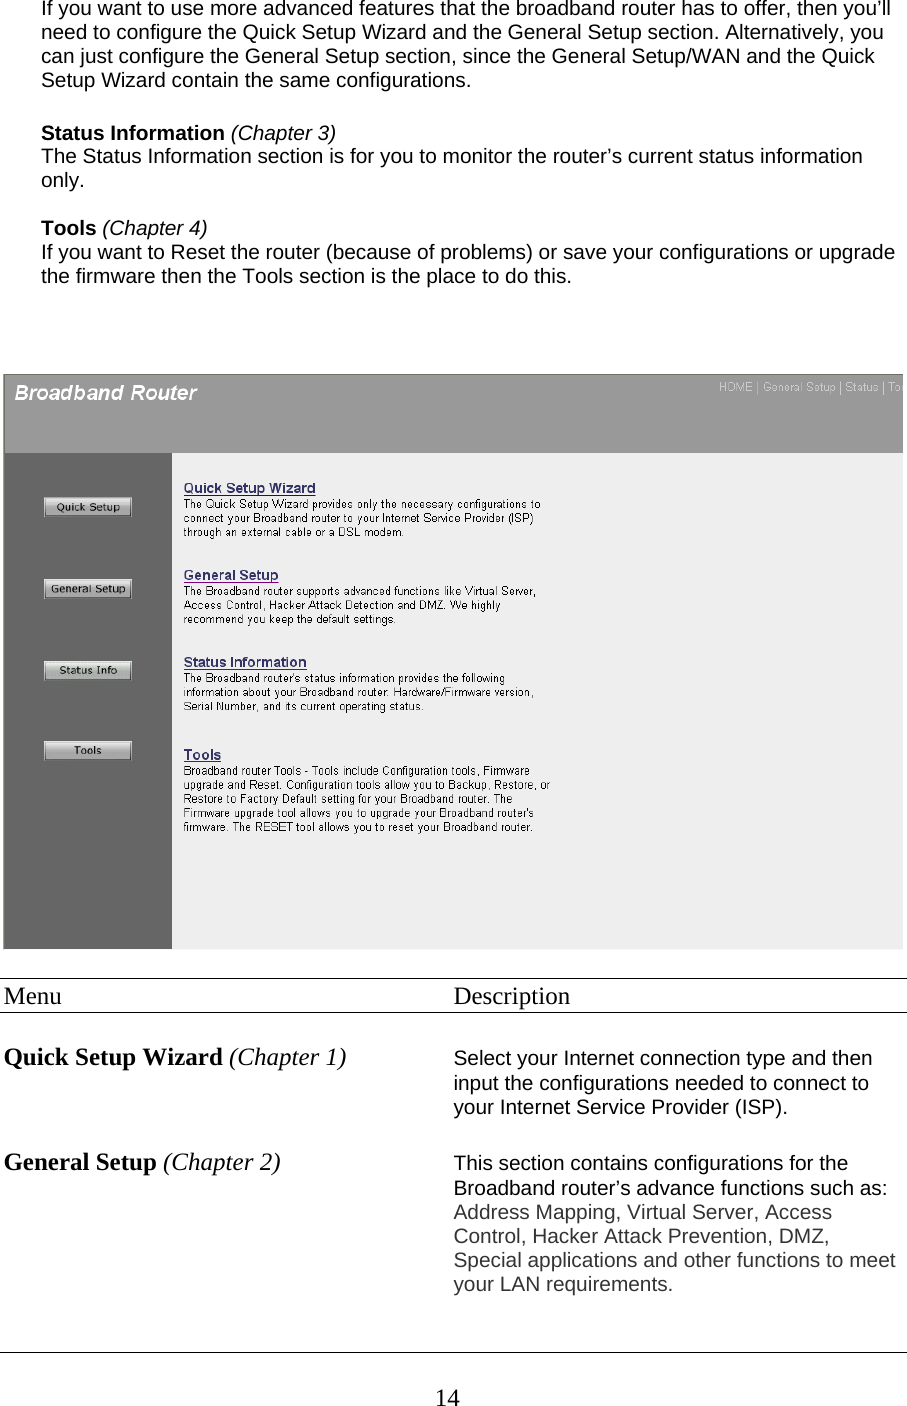 If you want to use more advanced features that the broadband router has to offer, then you’ll need to configure the Quick Setup Wizard and the General Setup section. Alternatively, you can just configure the General Setup section, since the General Setup/WAN and the Quick Setup Wizard contain the same configurations.  Status Information (Chapter 3) The Status Information section is for you to monitor the router’s current status information only.  Tools (Chapter 4) If you want to Reset the router (because of problems) or save your configurations or upgrade the firmware then the Tools section is the place to do this.       Menu      Description  Quick Setup Wizard (Chapter 1) Select your Internet connection type and then input the configurations needed to connect to your Internet Service Provider (ISP).  General Setup (Chapter 2) This section contains configurations for the Broadband router’s advance functions such as:  Address Mapping, Virtual Server, Access Control, Hacker Attack Prevention, DMZ, Special applications and other functions to meet your LAN requirements.    14